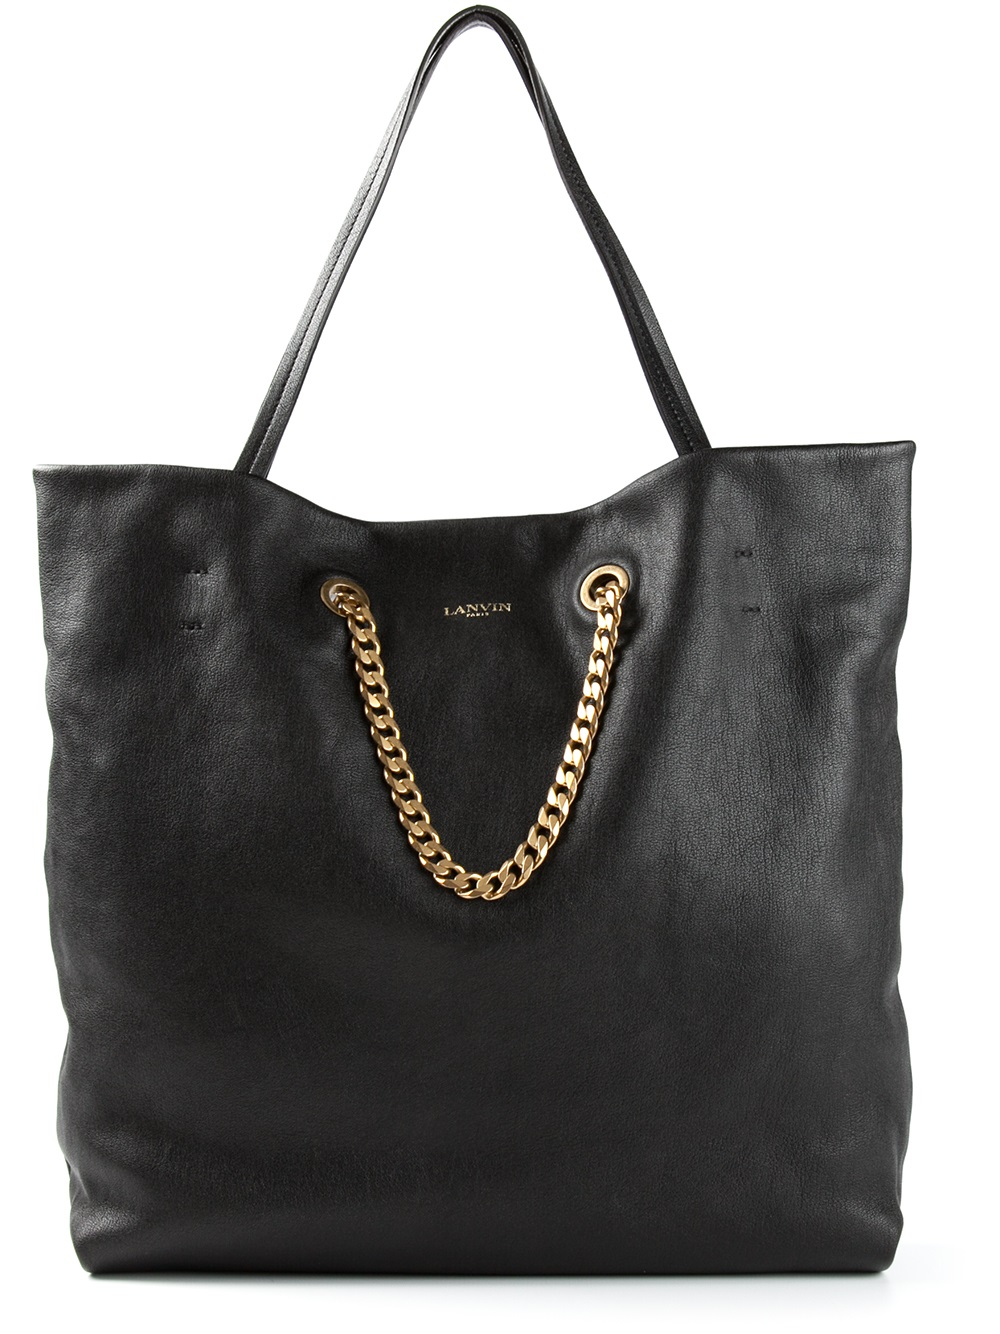 Lyst - Lanvin 'carry Me' Tote in Black